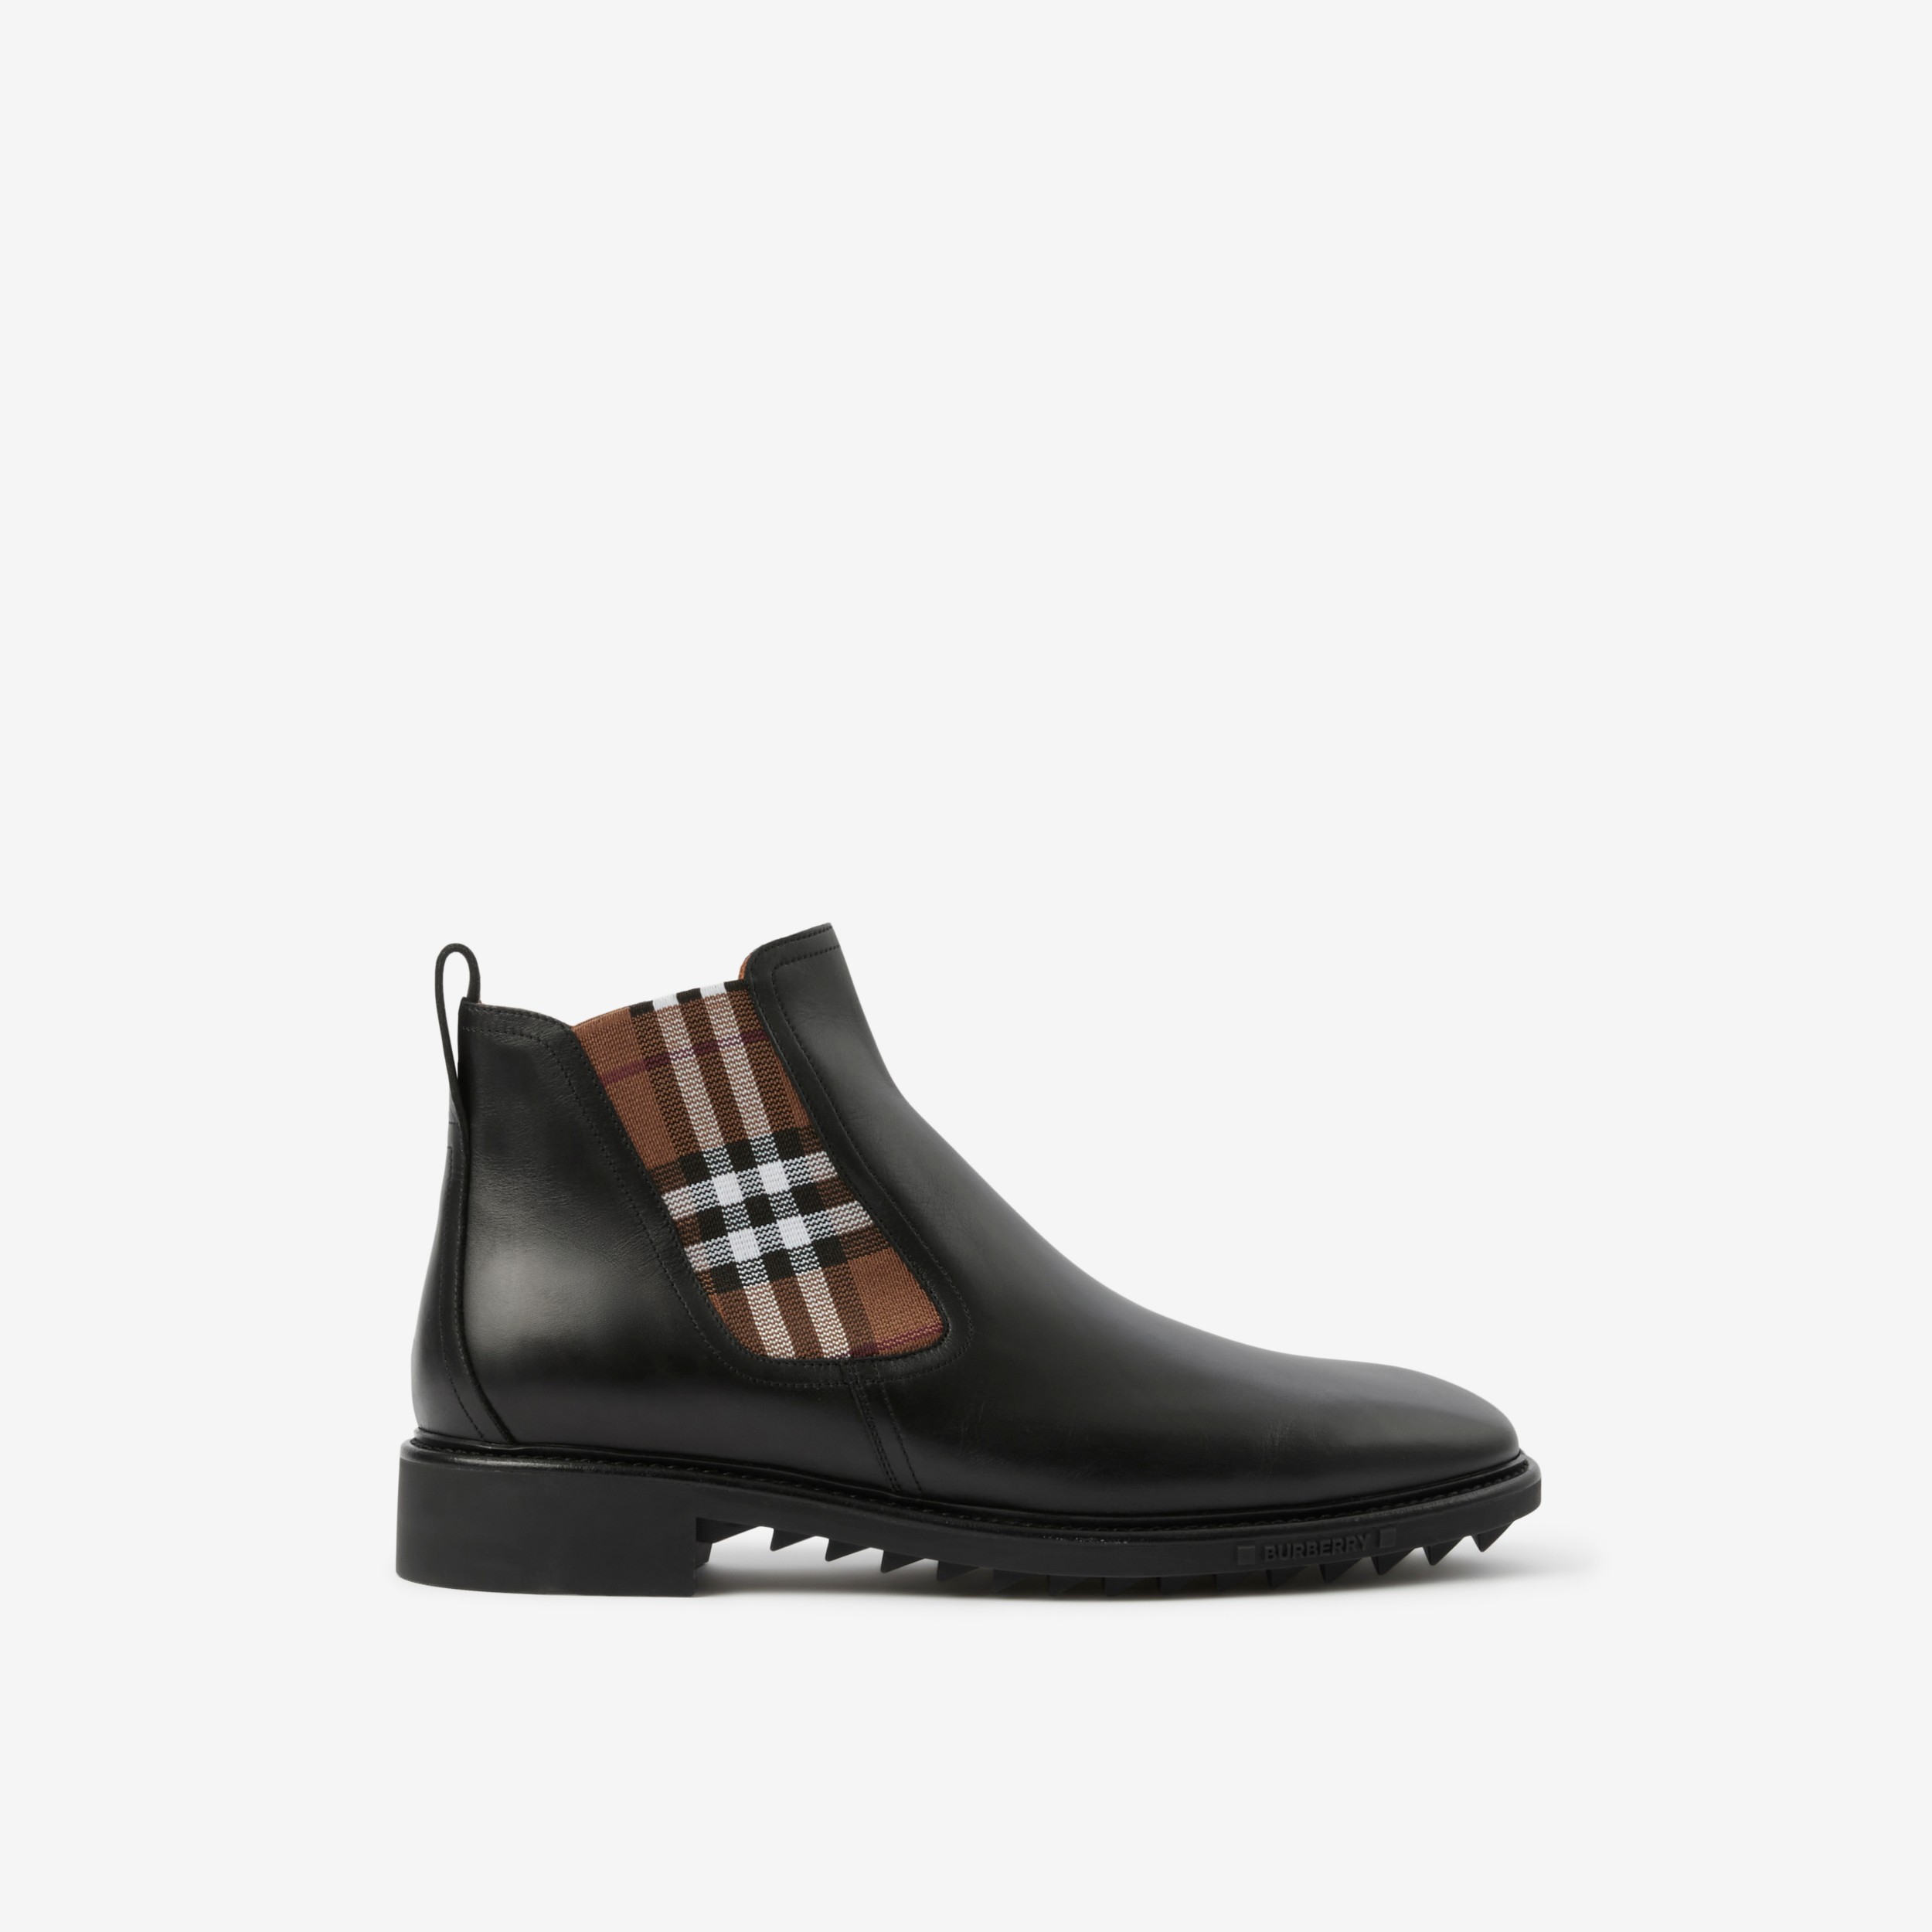 Classic Footwear: Burberry Chelsea Boots for Men